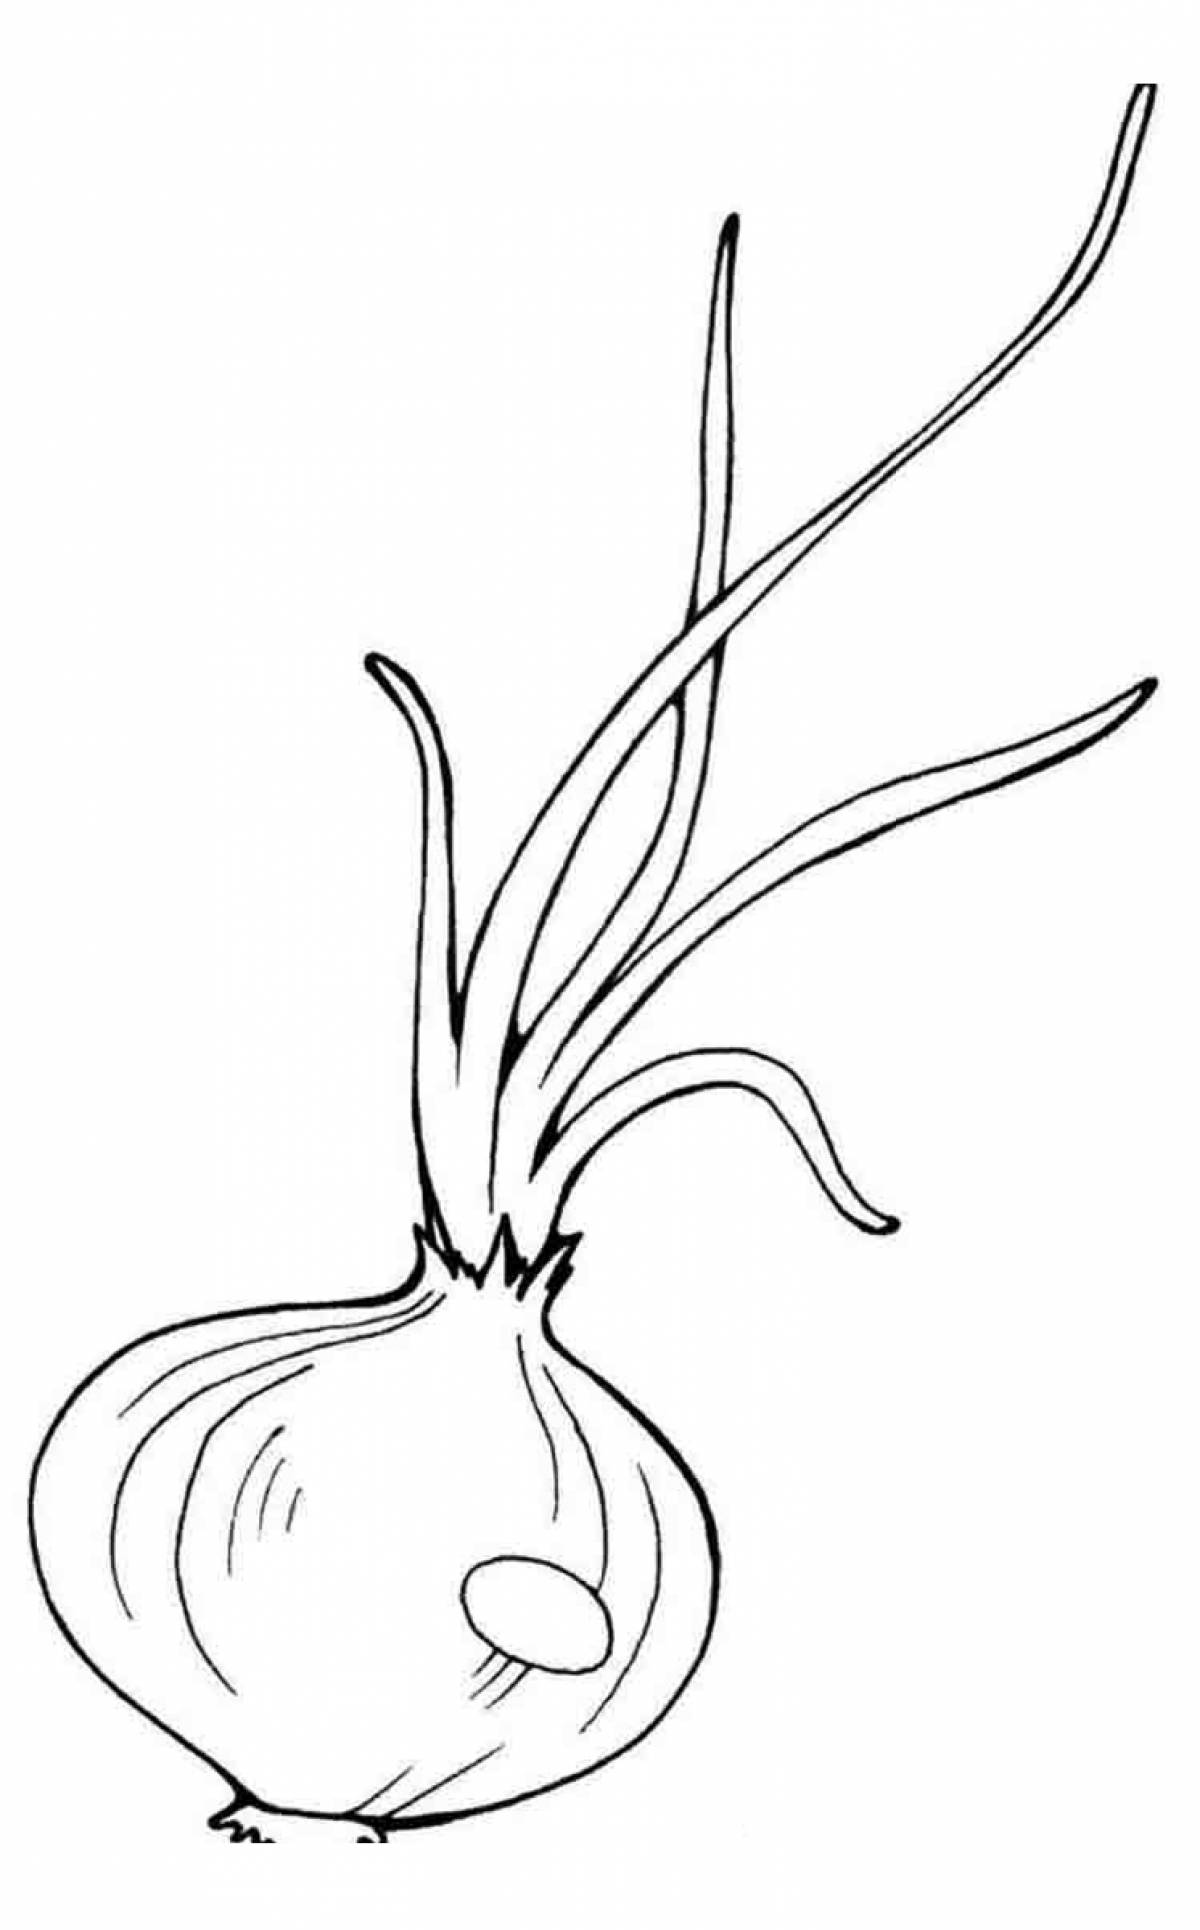 Onions with young feathers